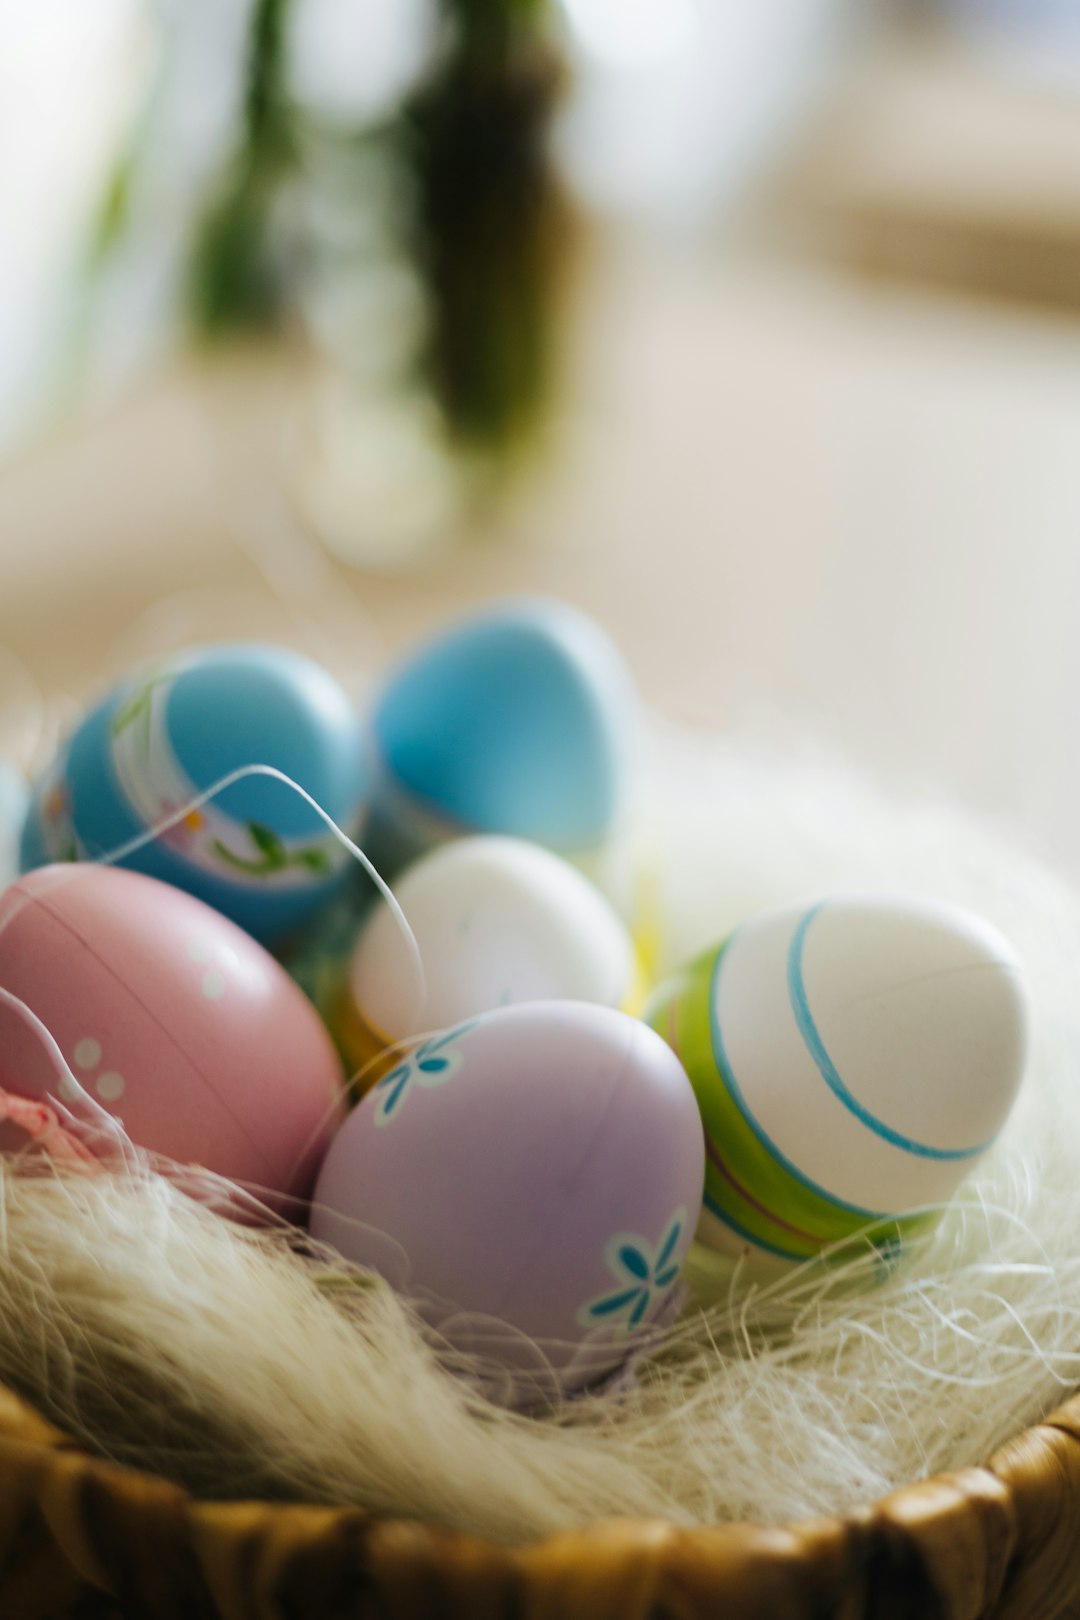 a basket filled with colorful eggs on top of a table